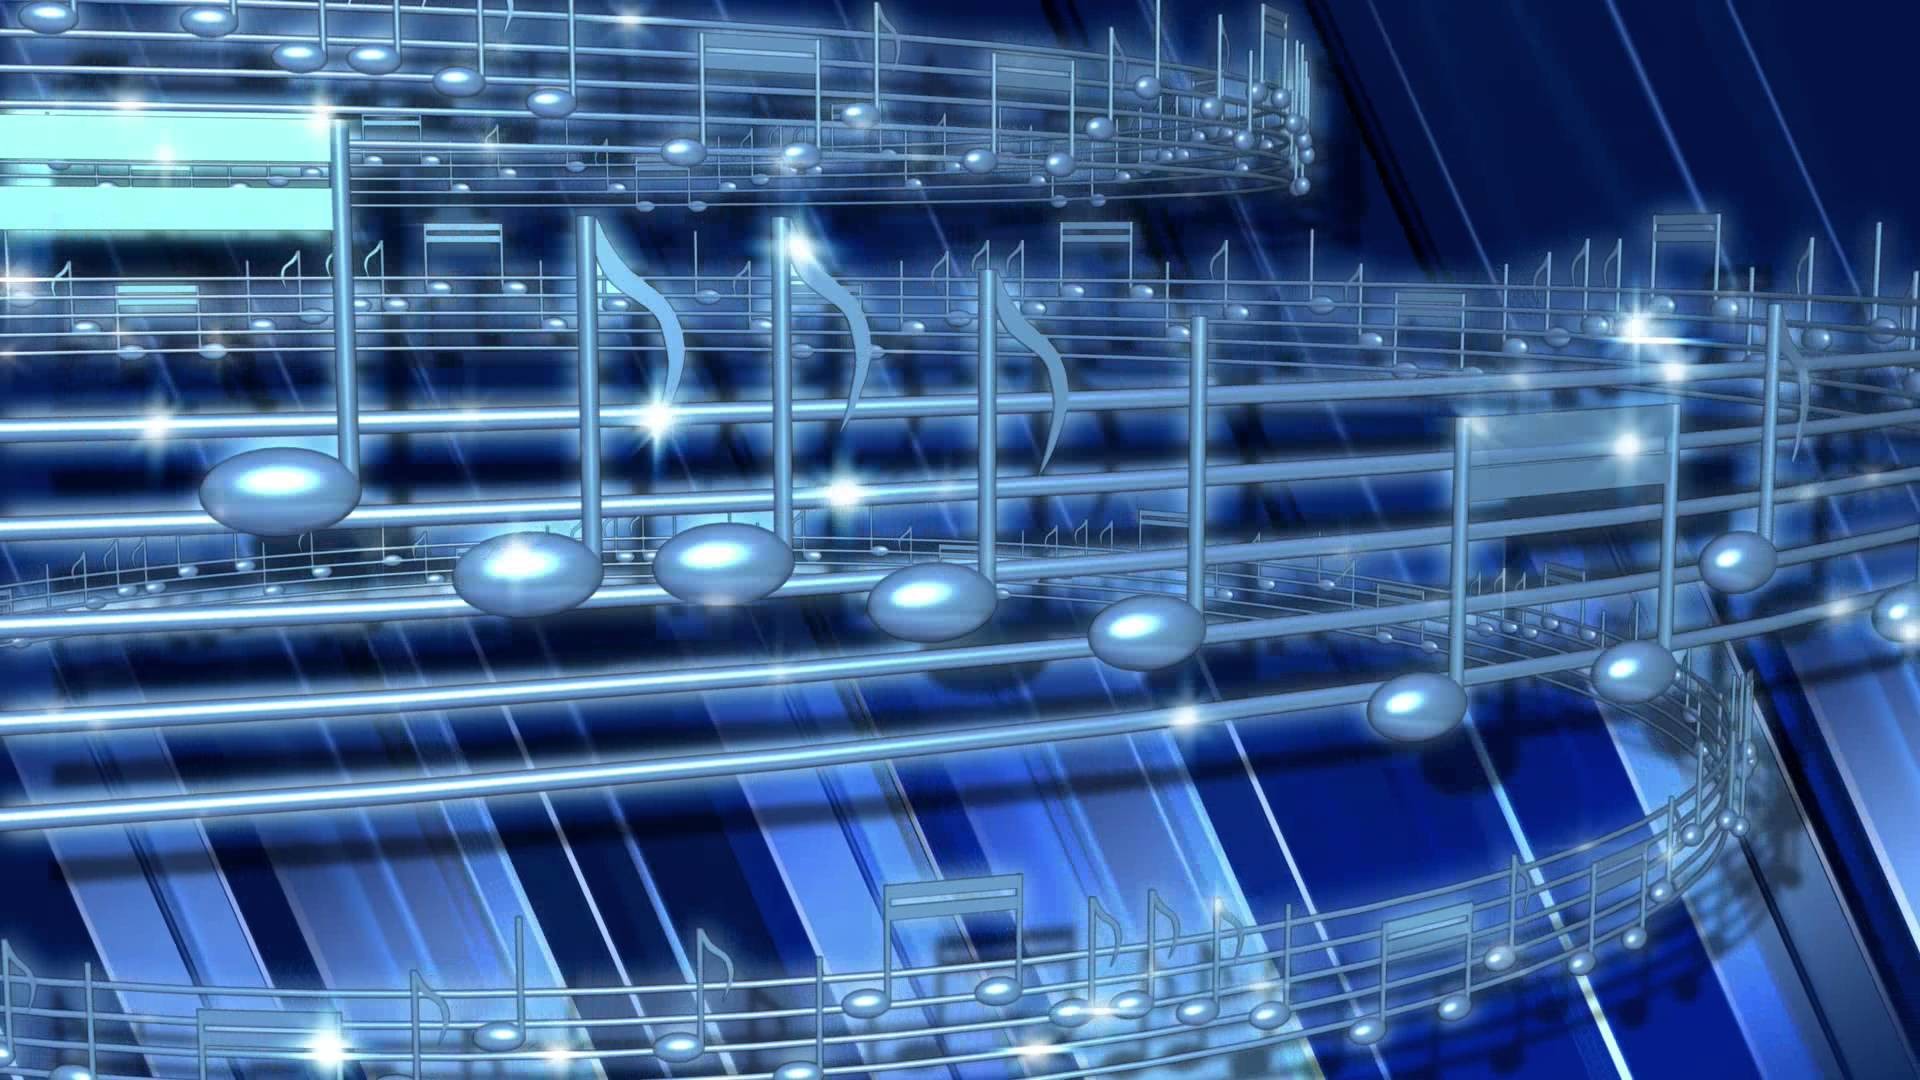 1920x1080 Blue Musical Notes Loop - Free Stock Video Footage - Free Stock Videos at  Videvo.net - YouTube